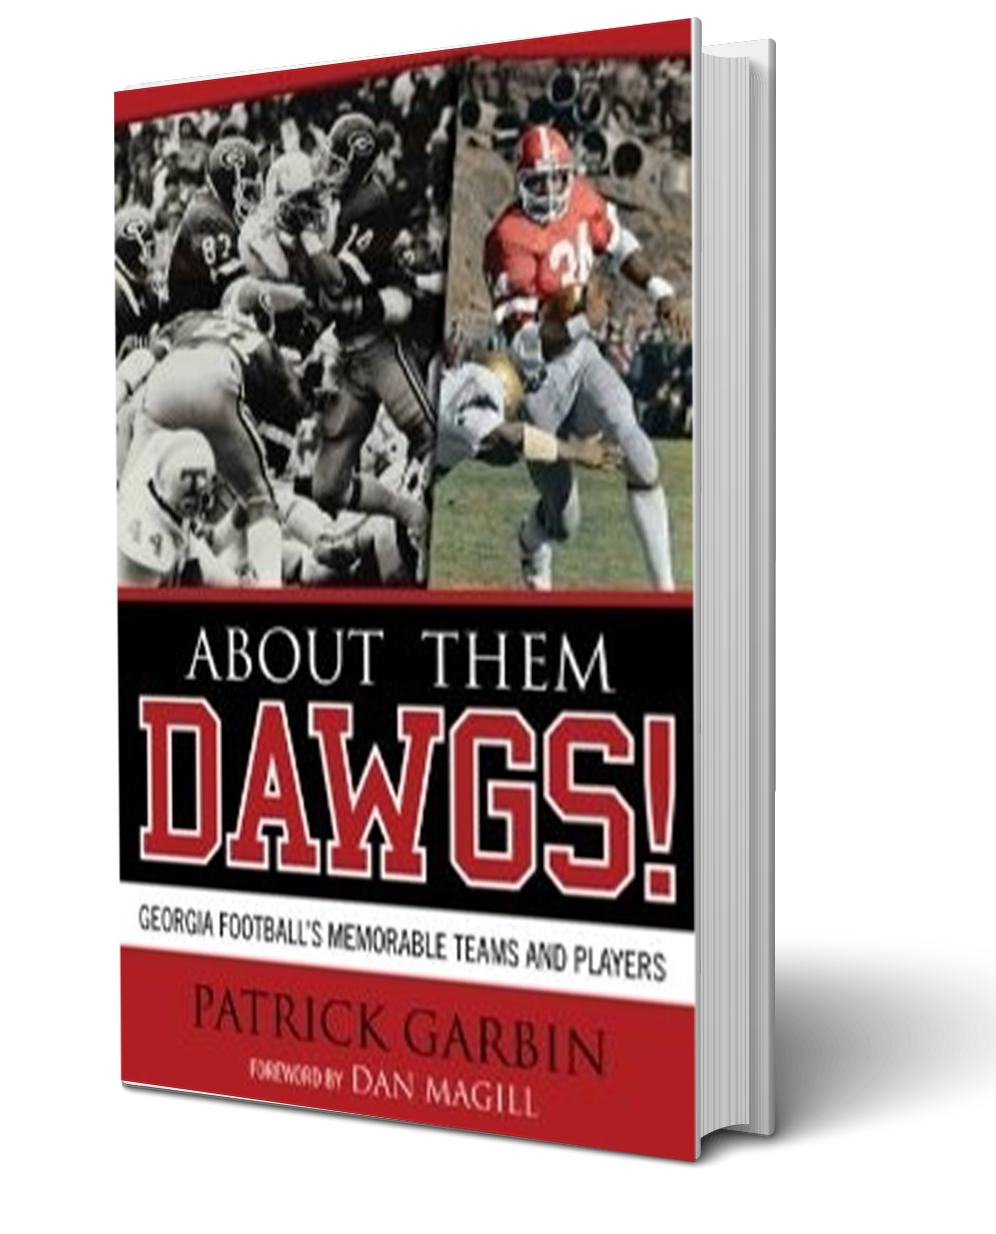 About Them Dawgs!